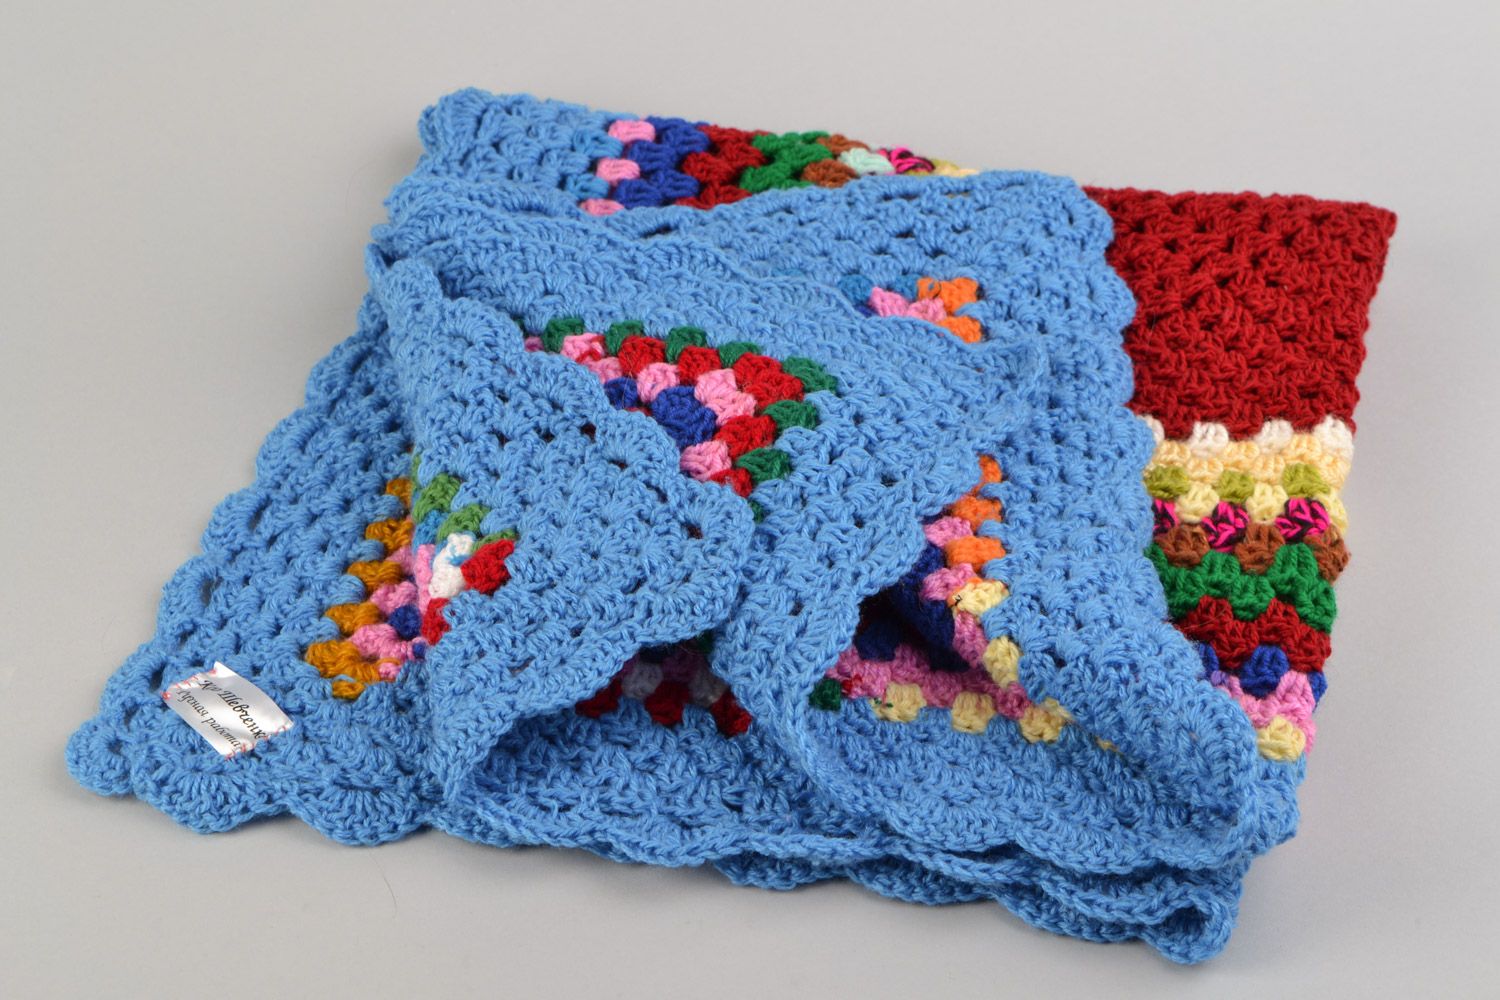 Handmade small blanket crocheted of semi-woolen colorful threads for children photo 4